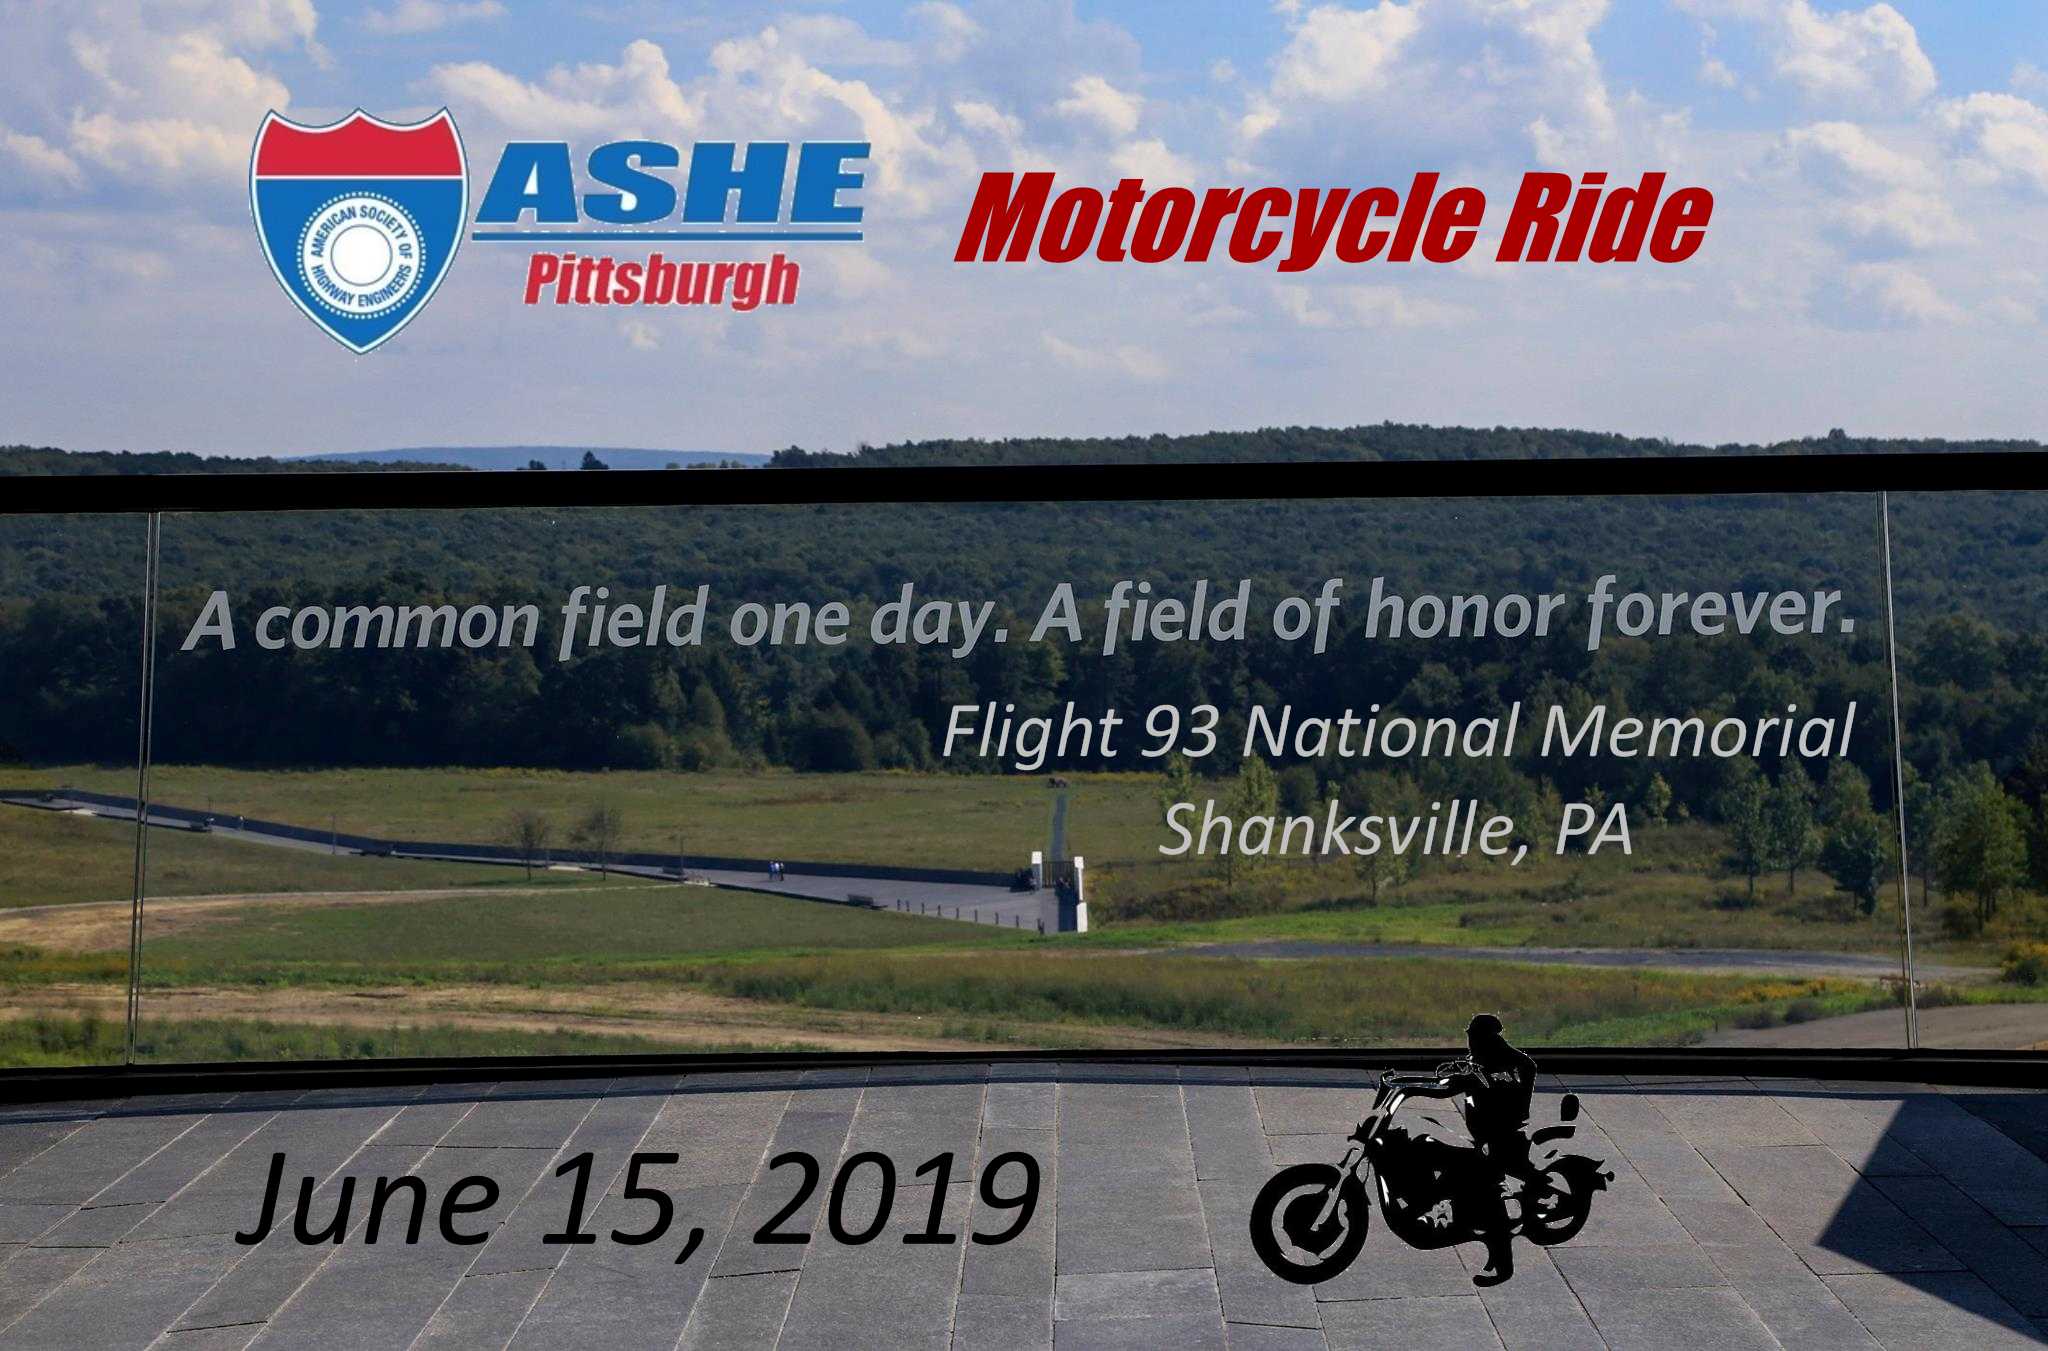 ashe pgh 2019 motorcycle ride